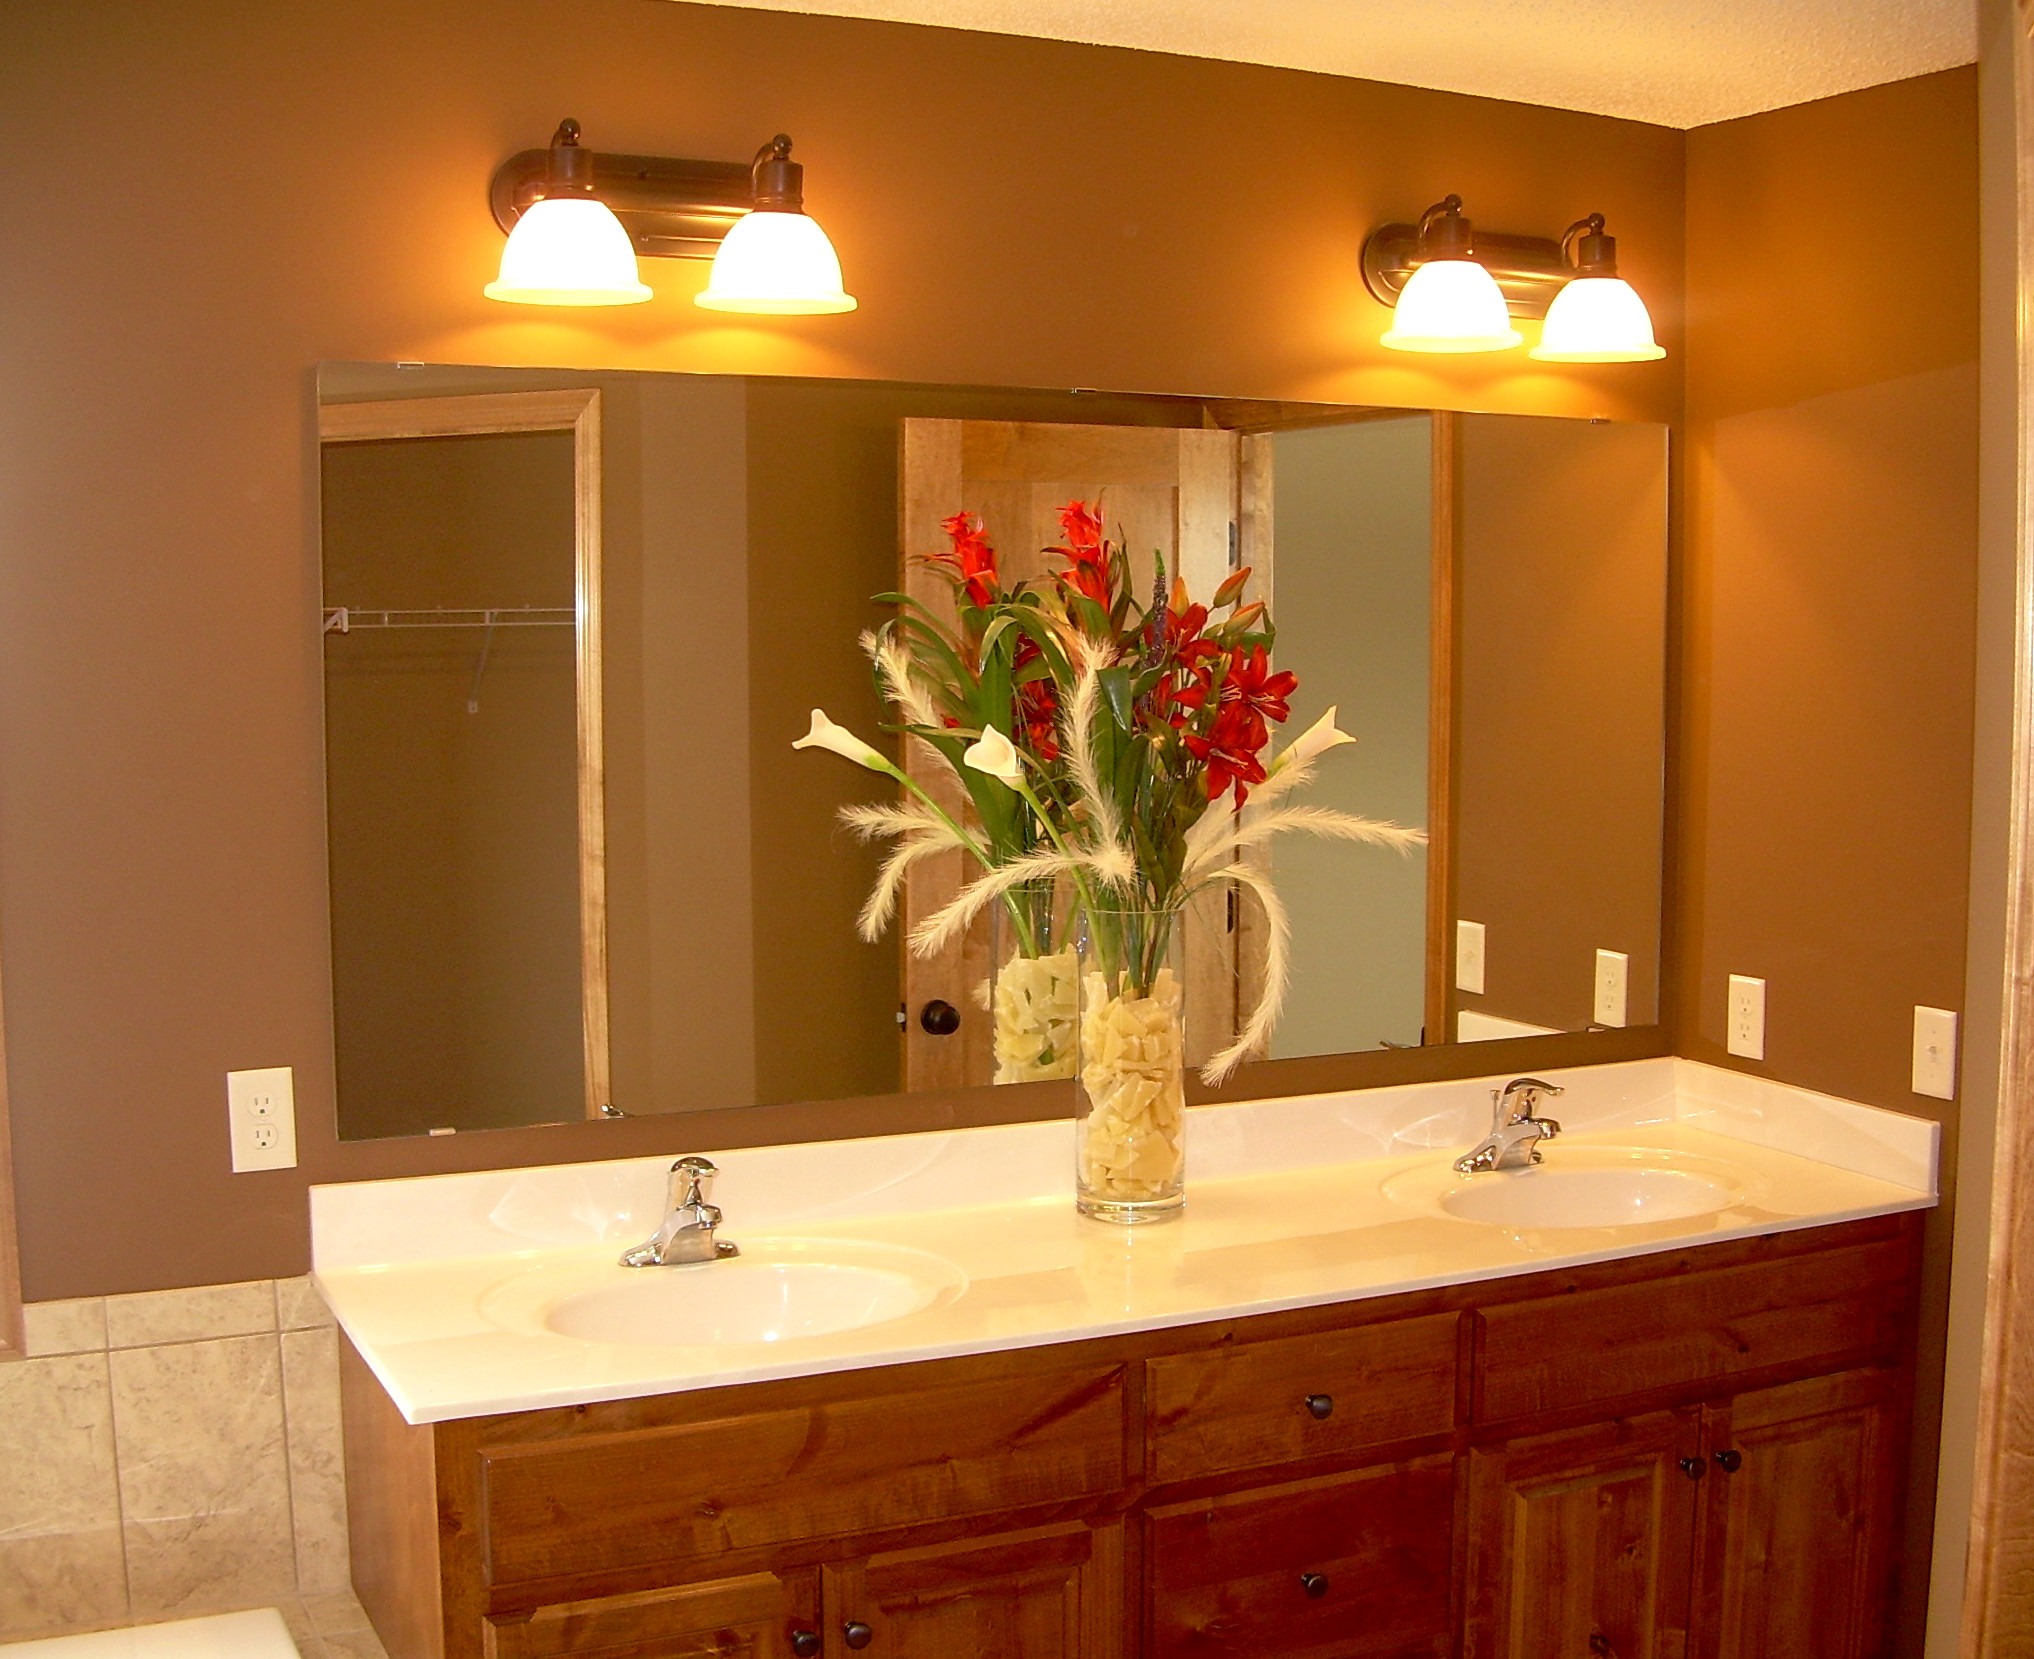 Double Vanity Mirrors For Bathroom
 How To Choose The Best Bathroom Mirrors